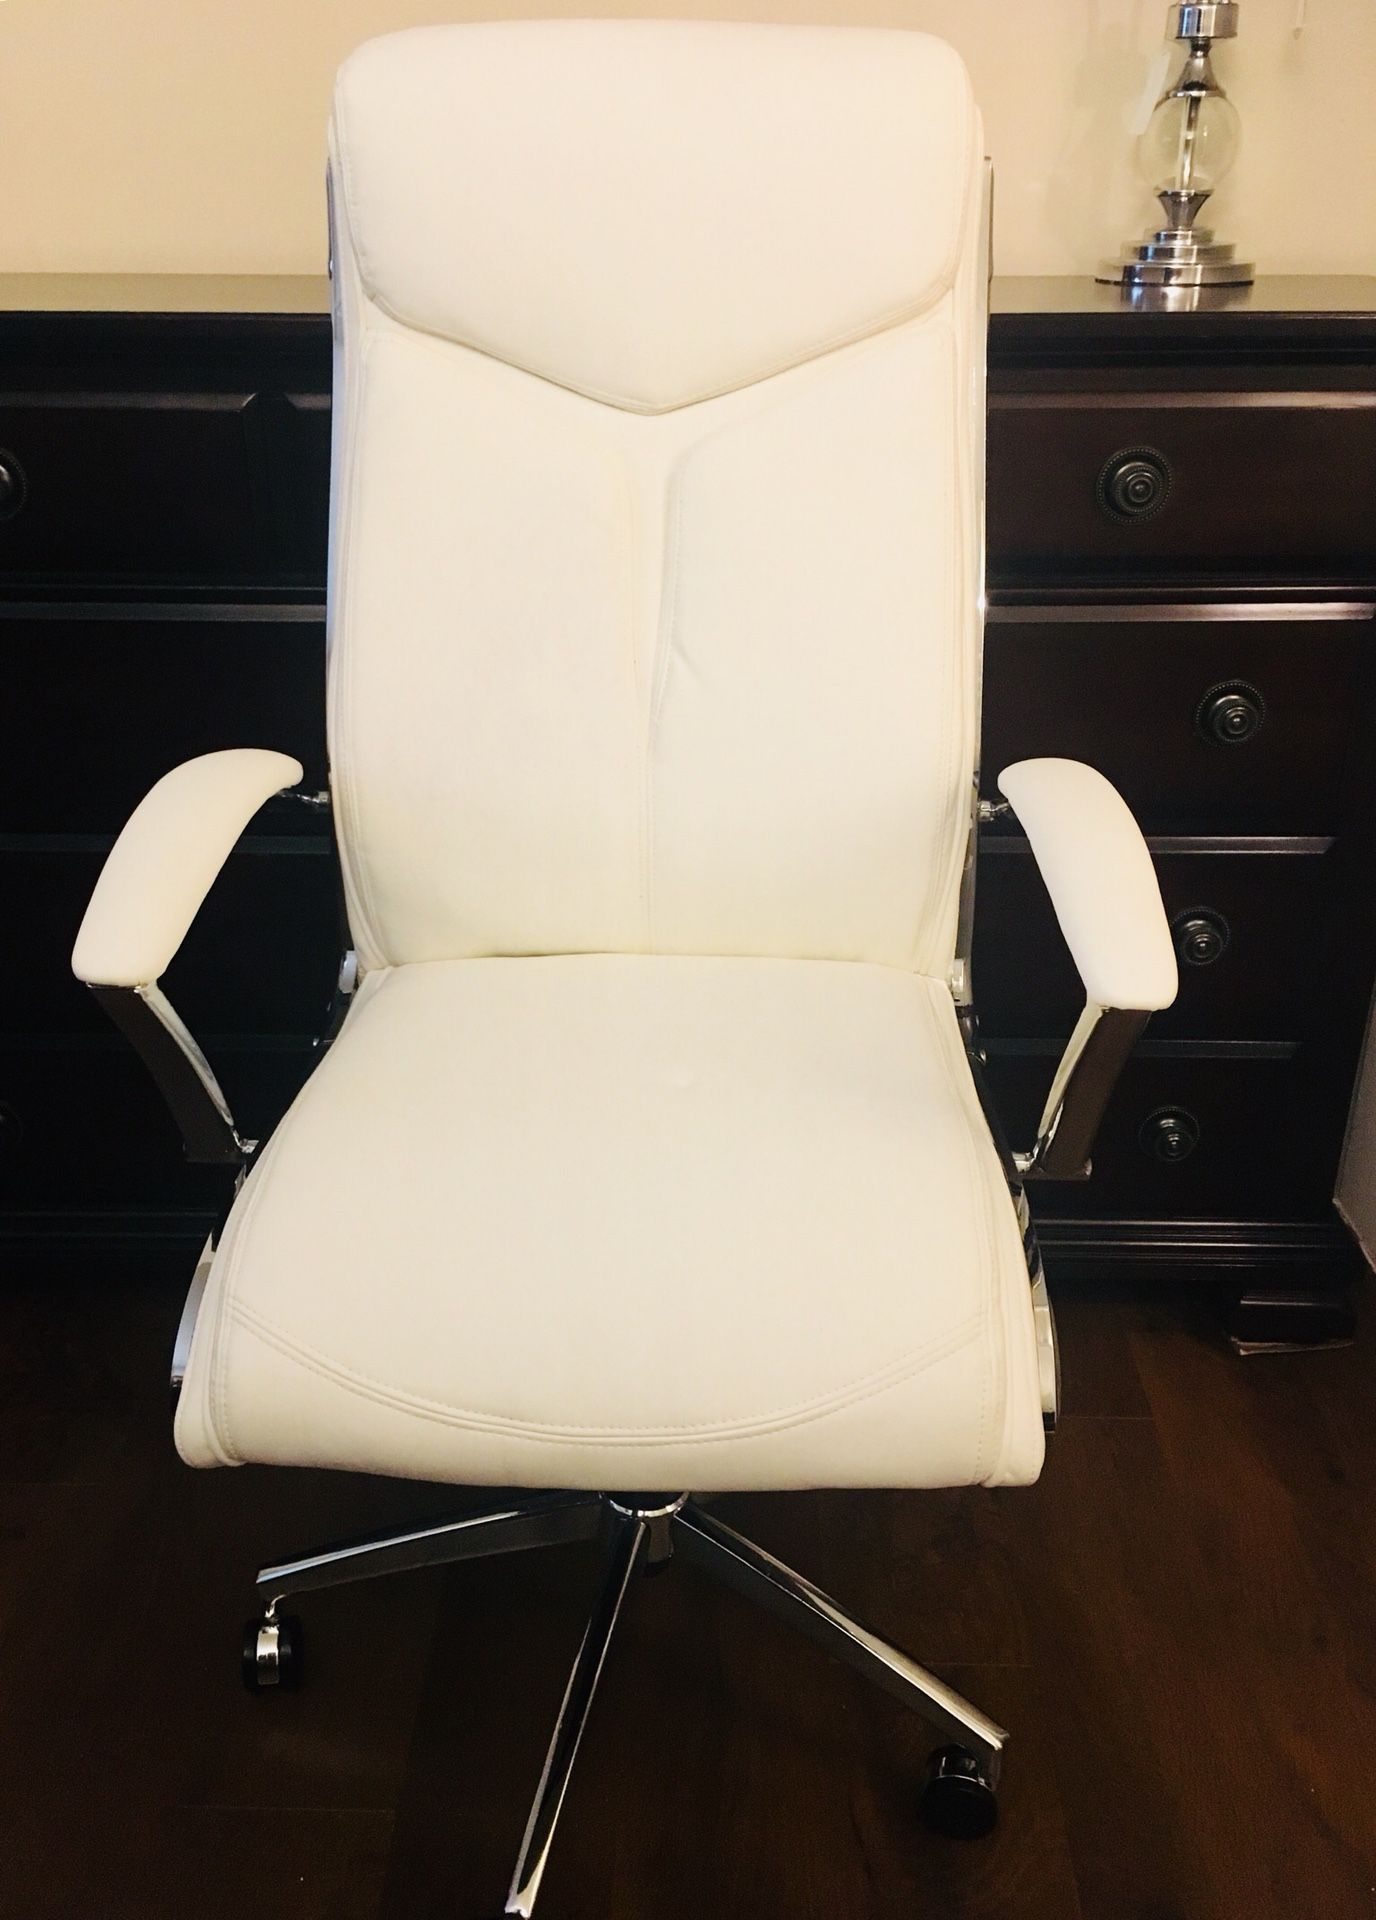 New & Assembled Realspace Modern Comfort Verismo Bonded Leather Executive High-Back Office Chair White